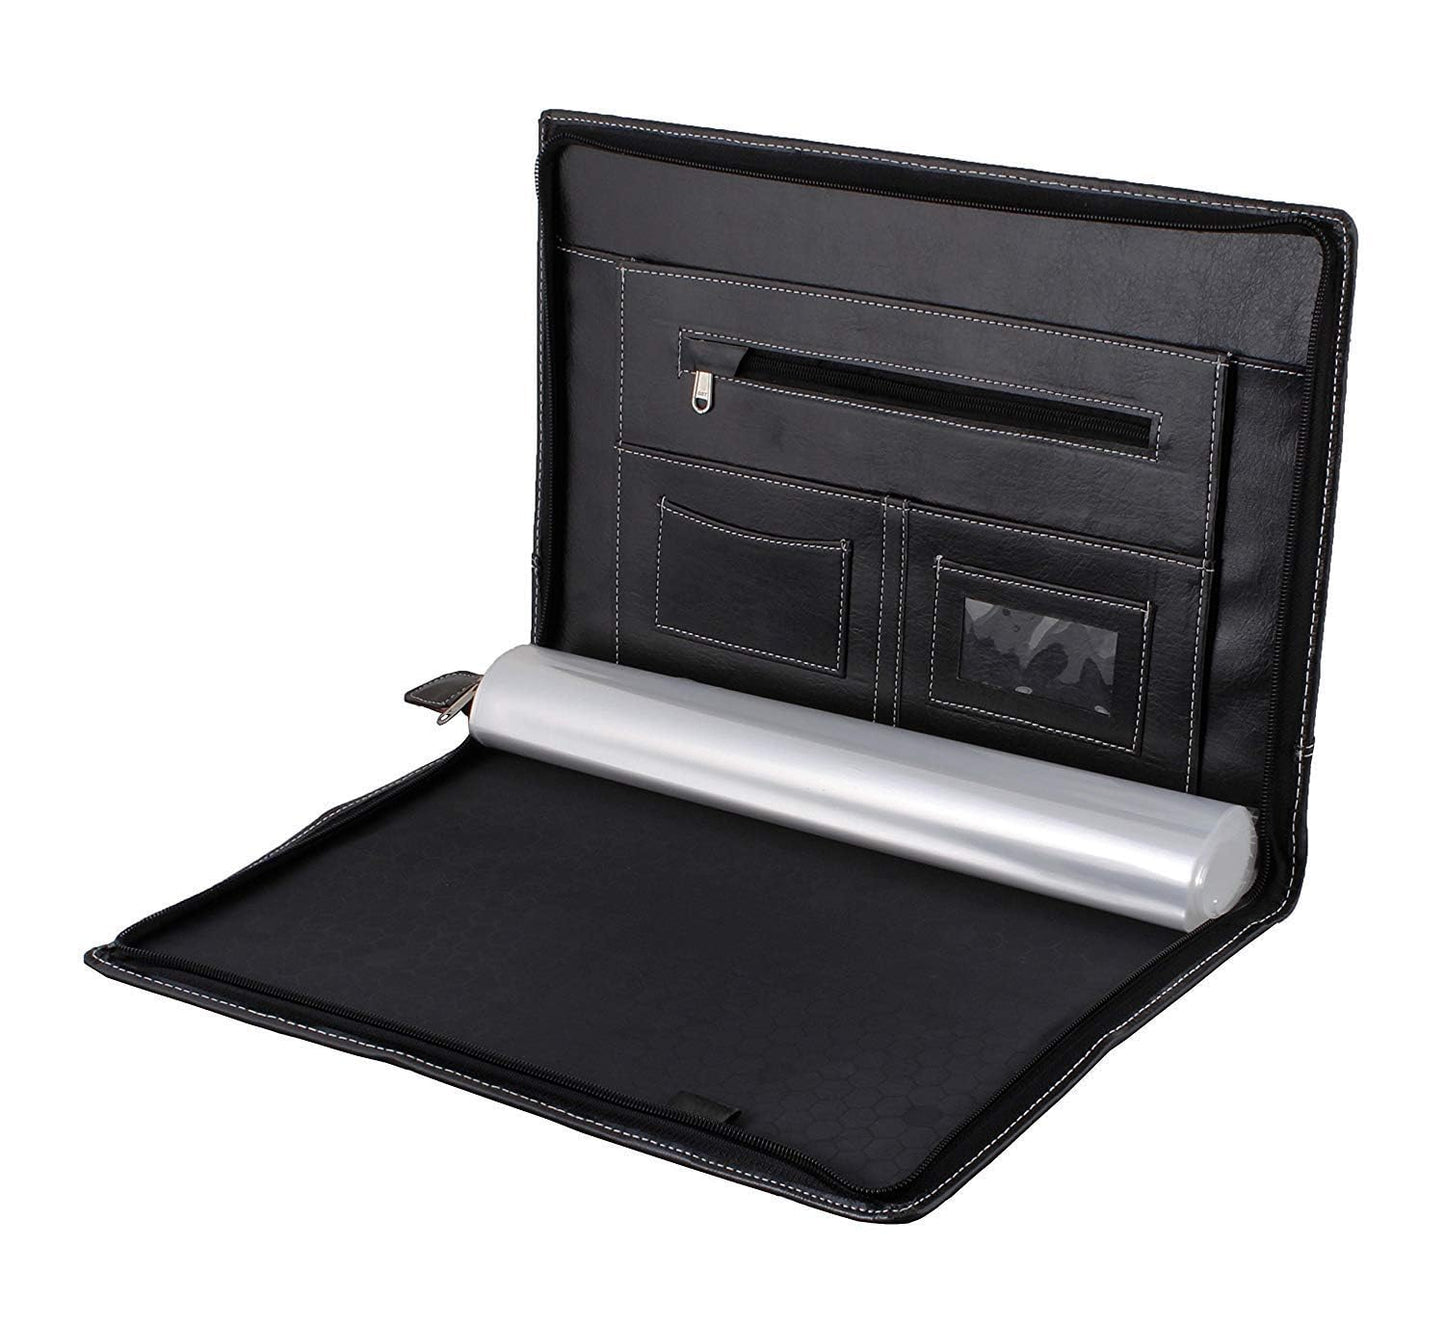 EYUVAA 20 Leafs Leatherette Professional Document Conference Certificate Documents Files Holder with Pen Holders (Black)